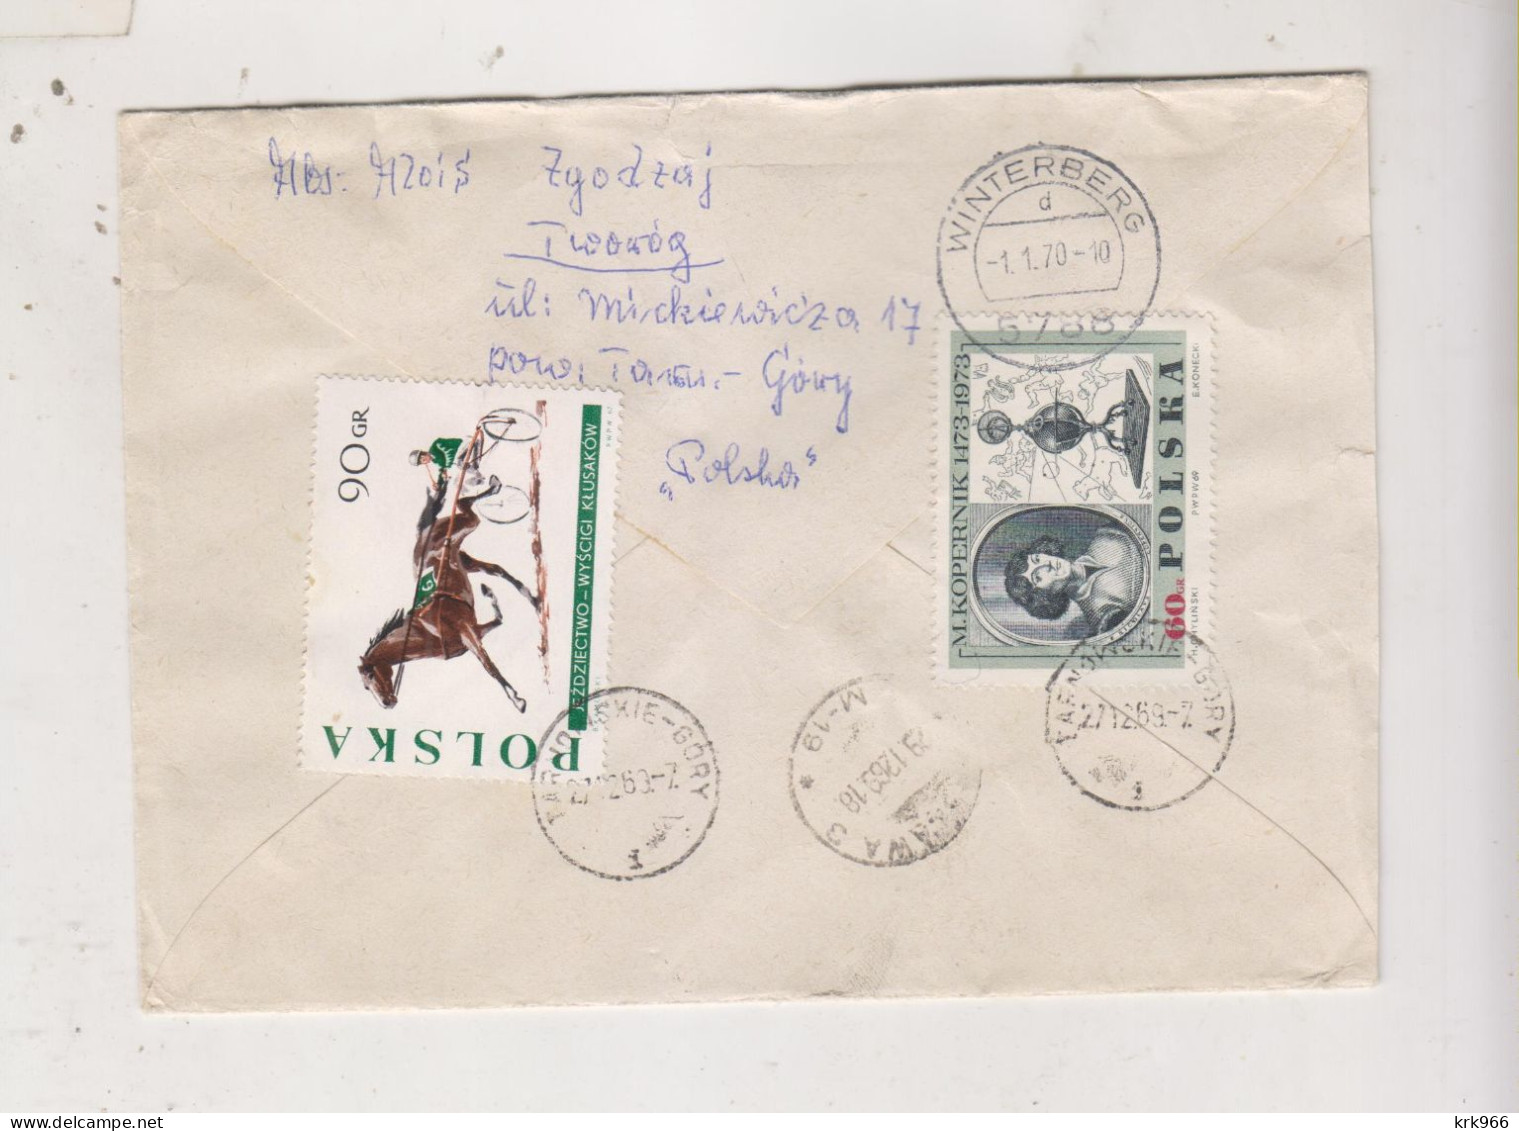 POLAND 1969  TARNOWSKIE GORY Registered Cover To Germany - Lettres & Documents